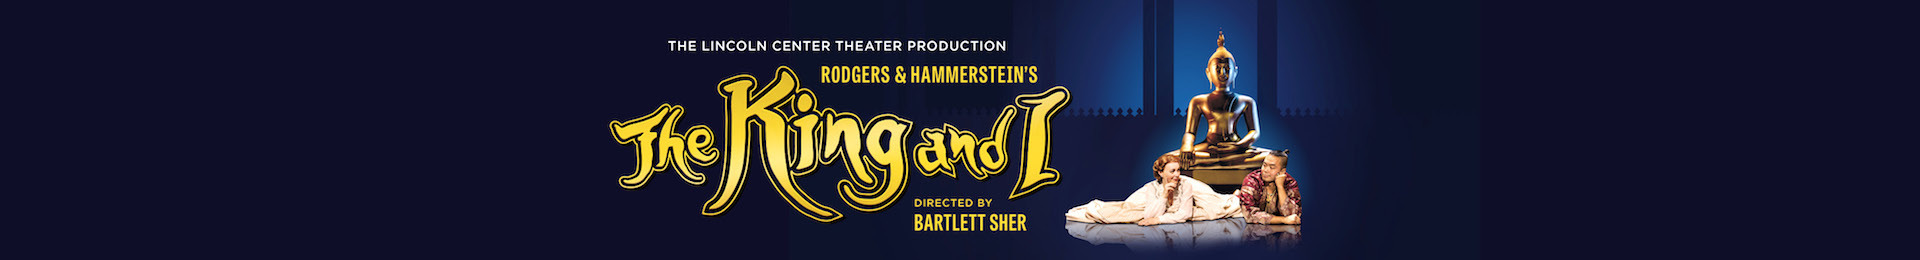 The King and I - Hull banner image